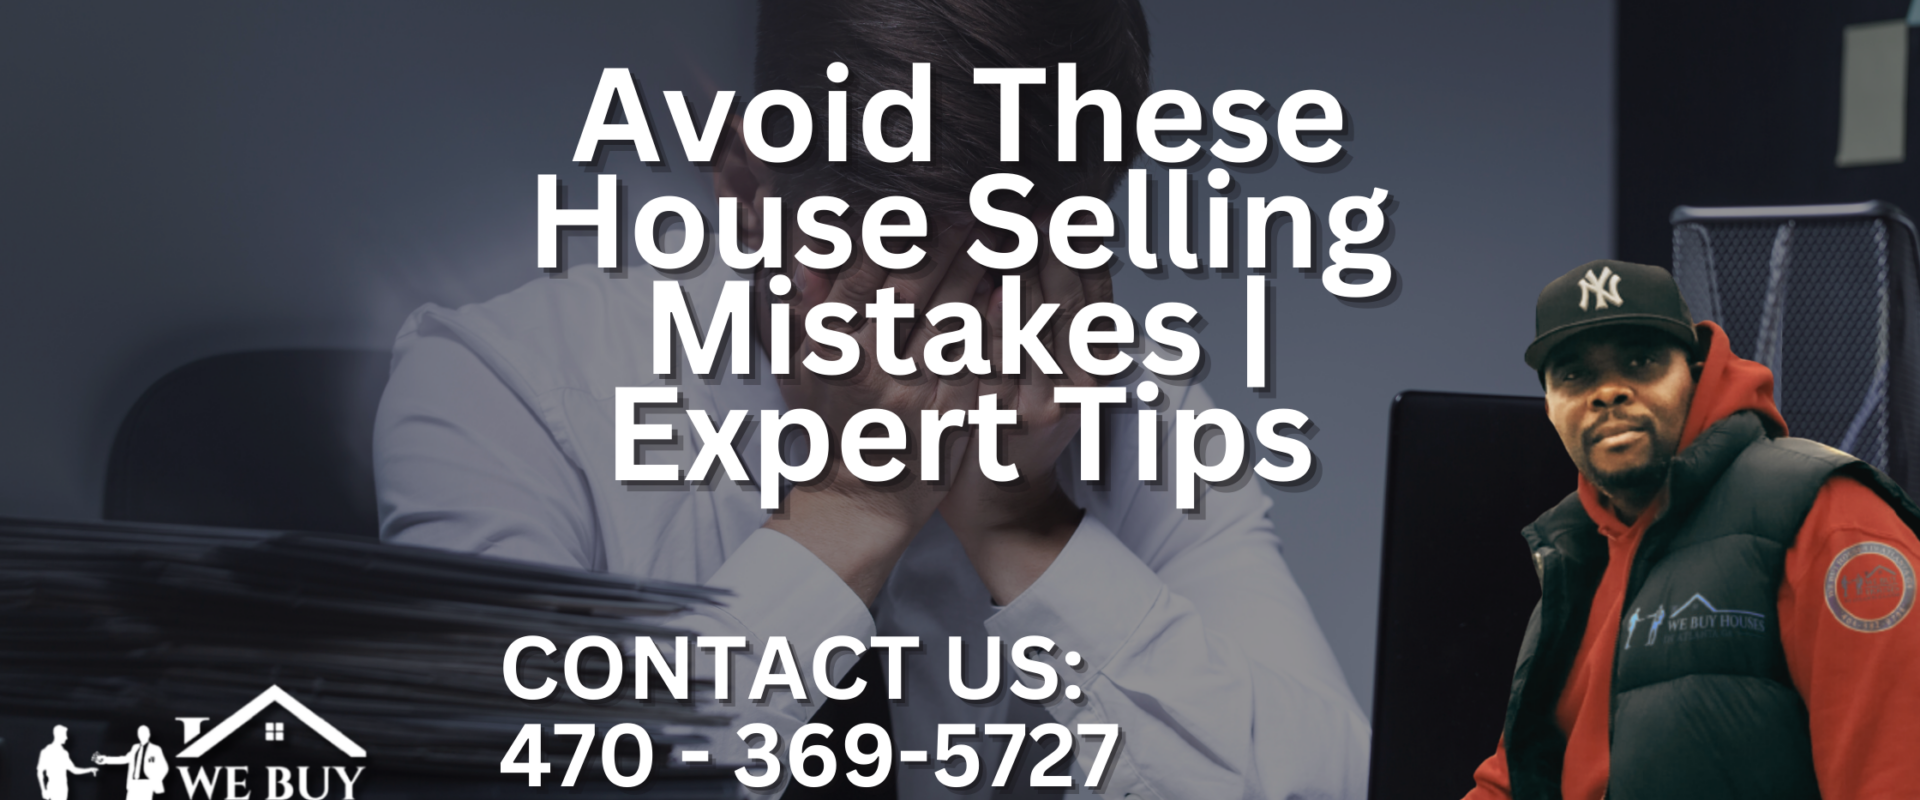 Avoid-These-House-Selling-Mistakes-Expert-Tips-1